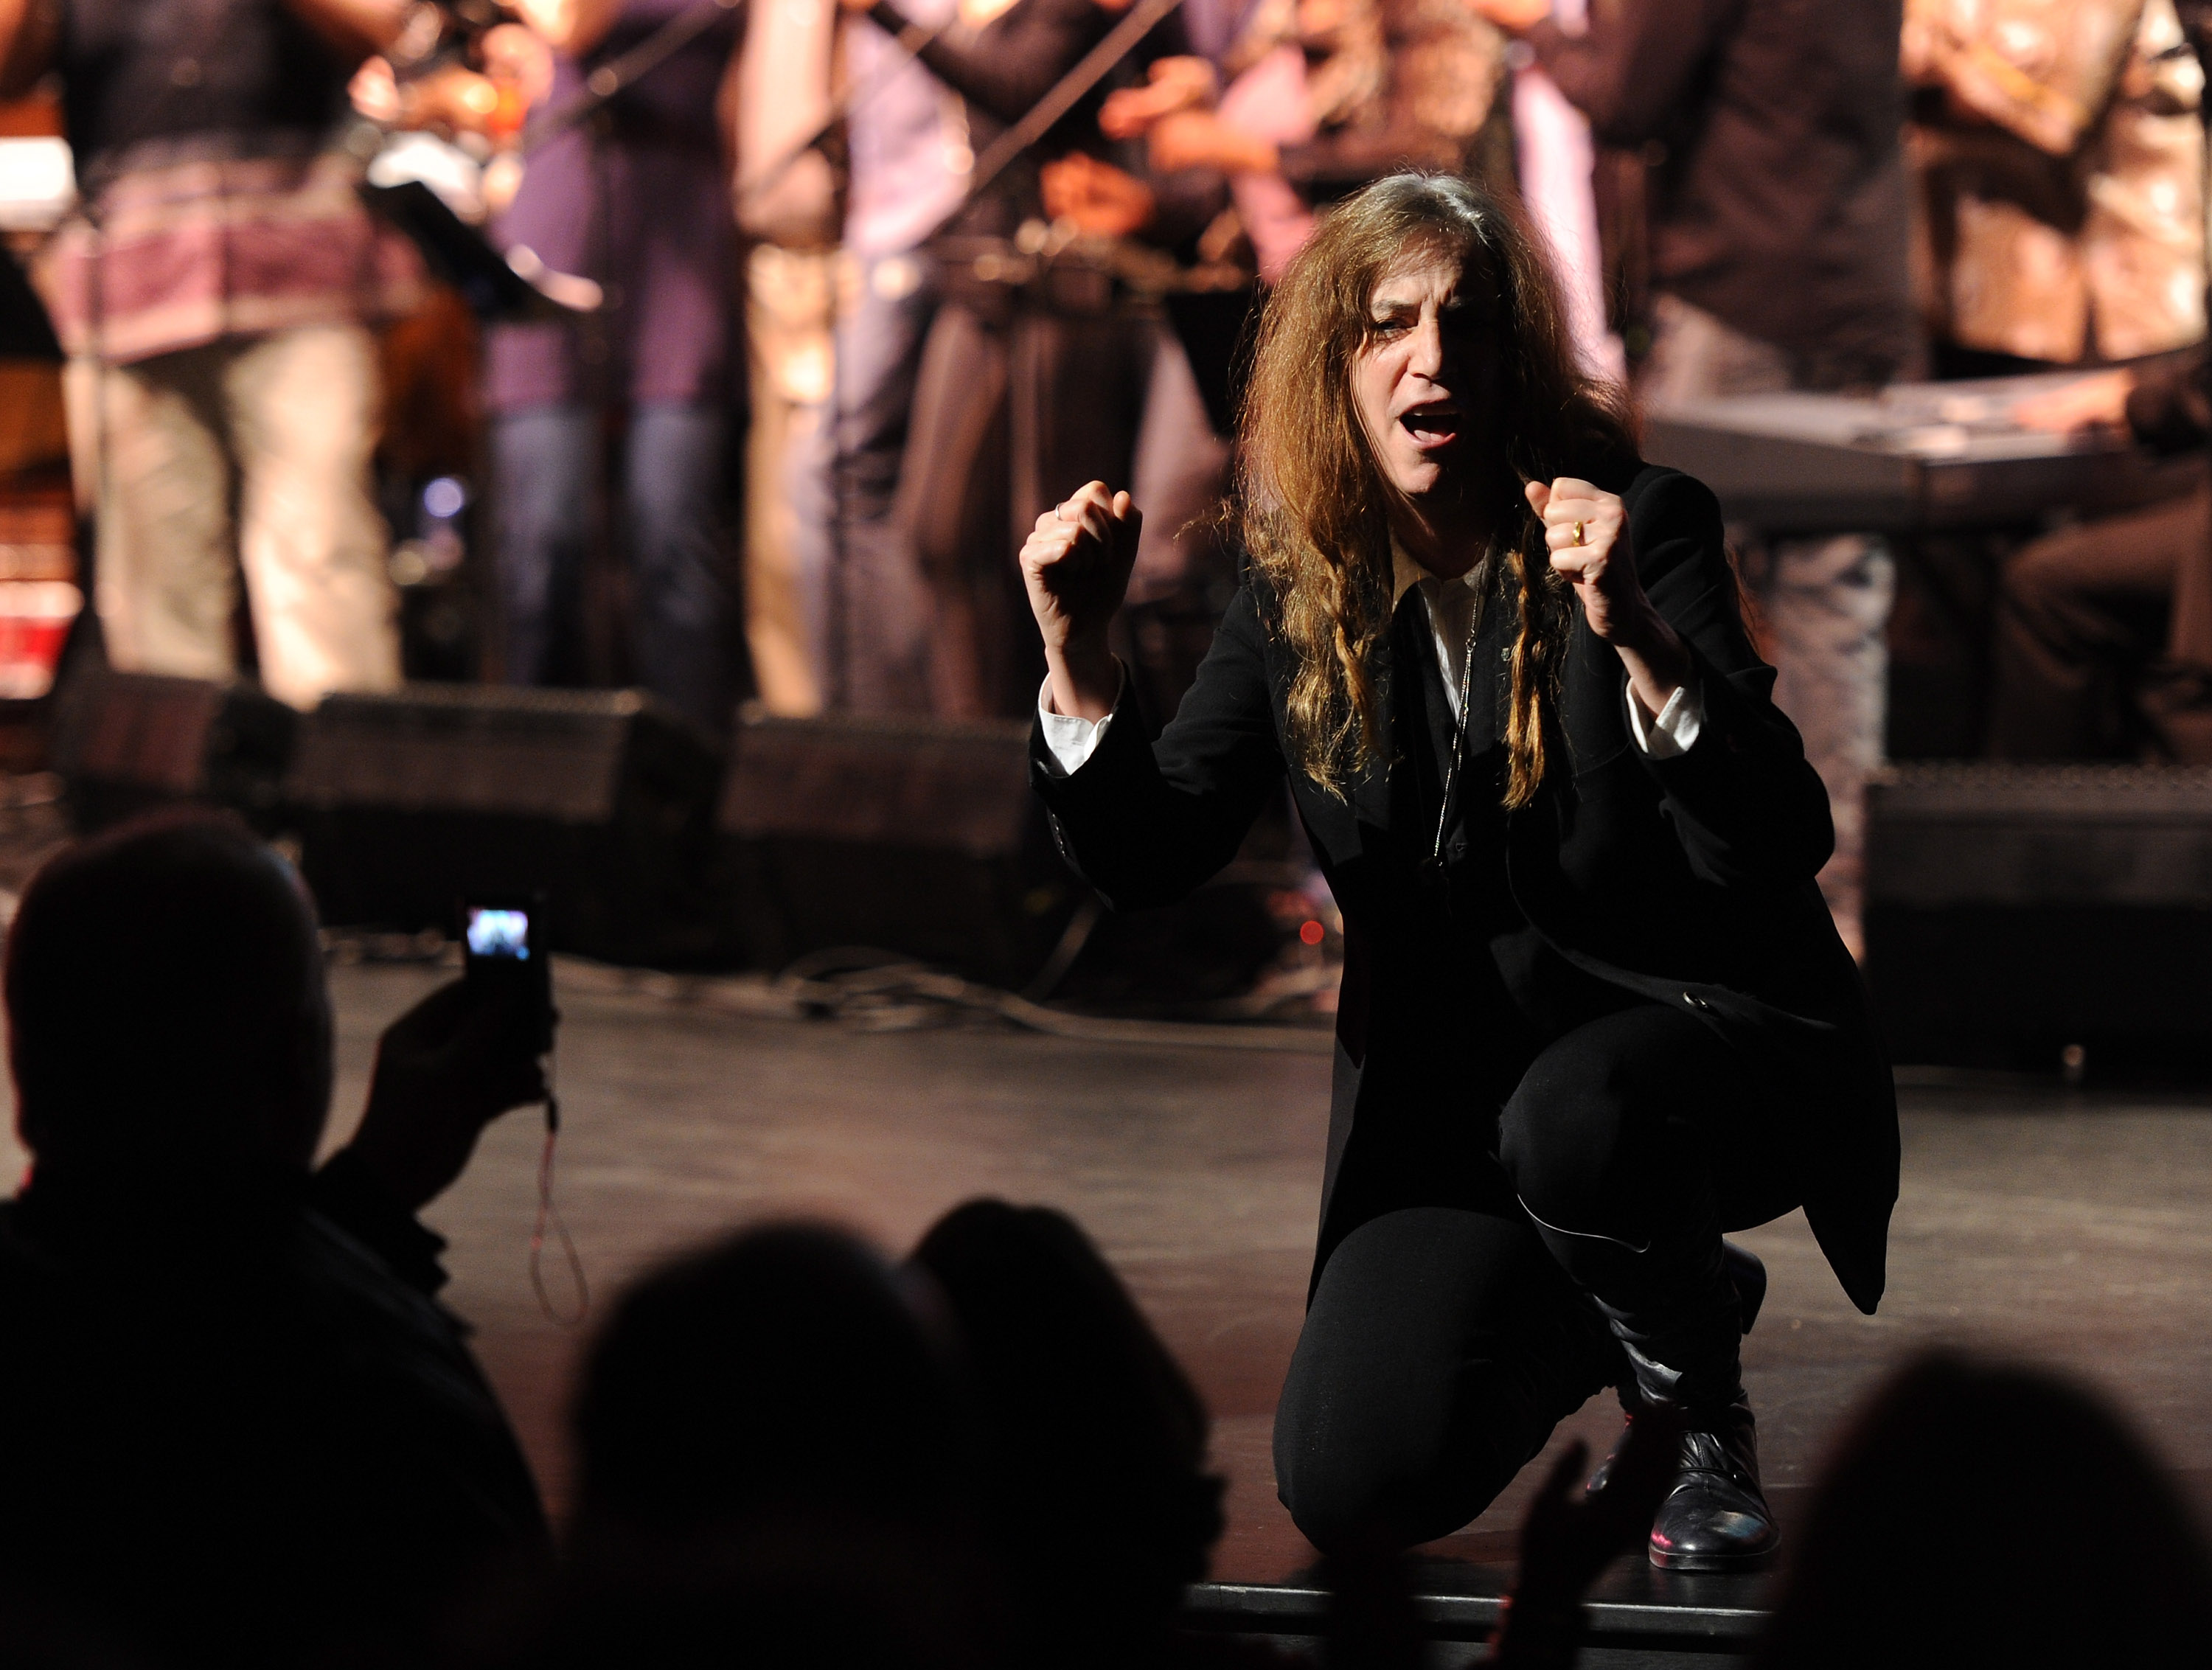 NEW YORK - NOVEMBER 12: Singer Patti Smith performs during Theatre Within's 30th Annual John Lennon Tribute Concert Benefitting the Playing For Change Foundation at the Beacon Theatre on November 12, 2010 in New York, City. (Photo by Stephen Lovekin/Getty Images)